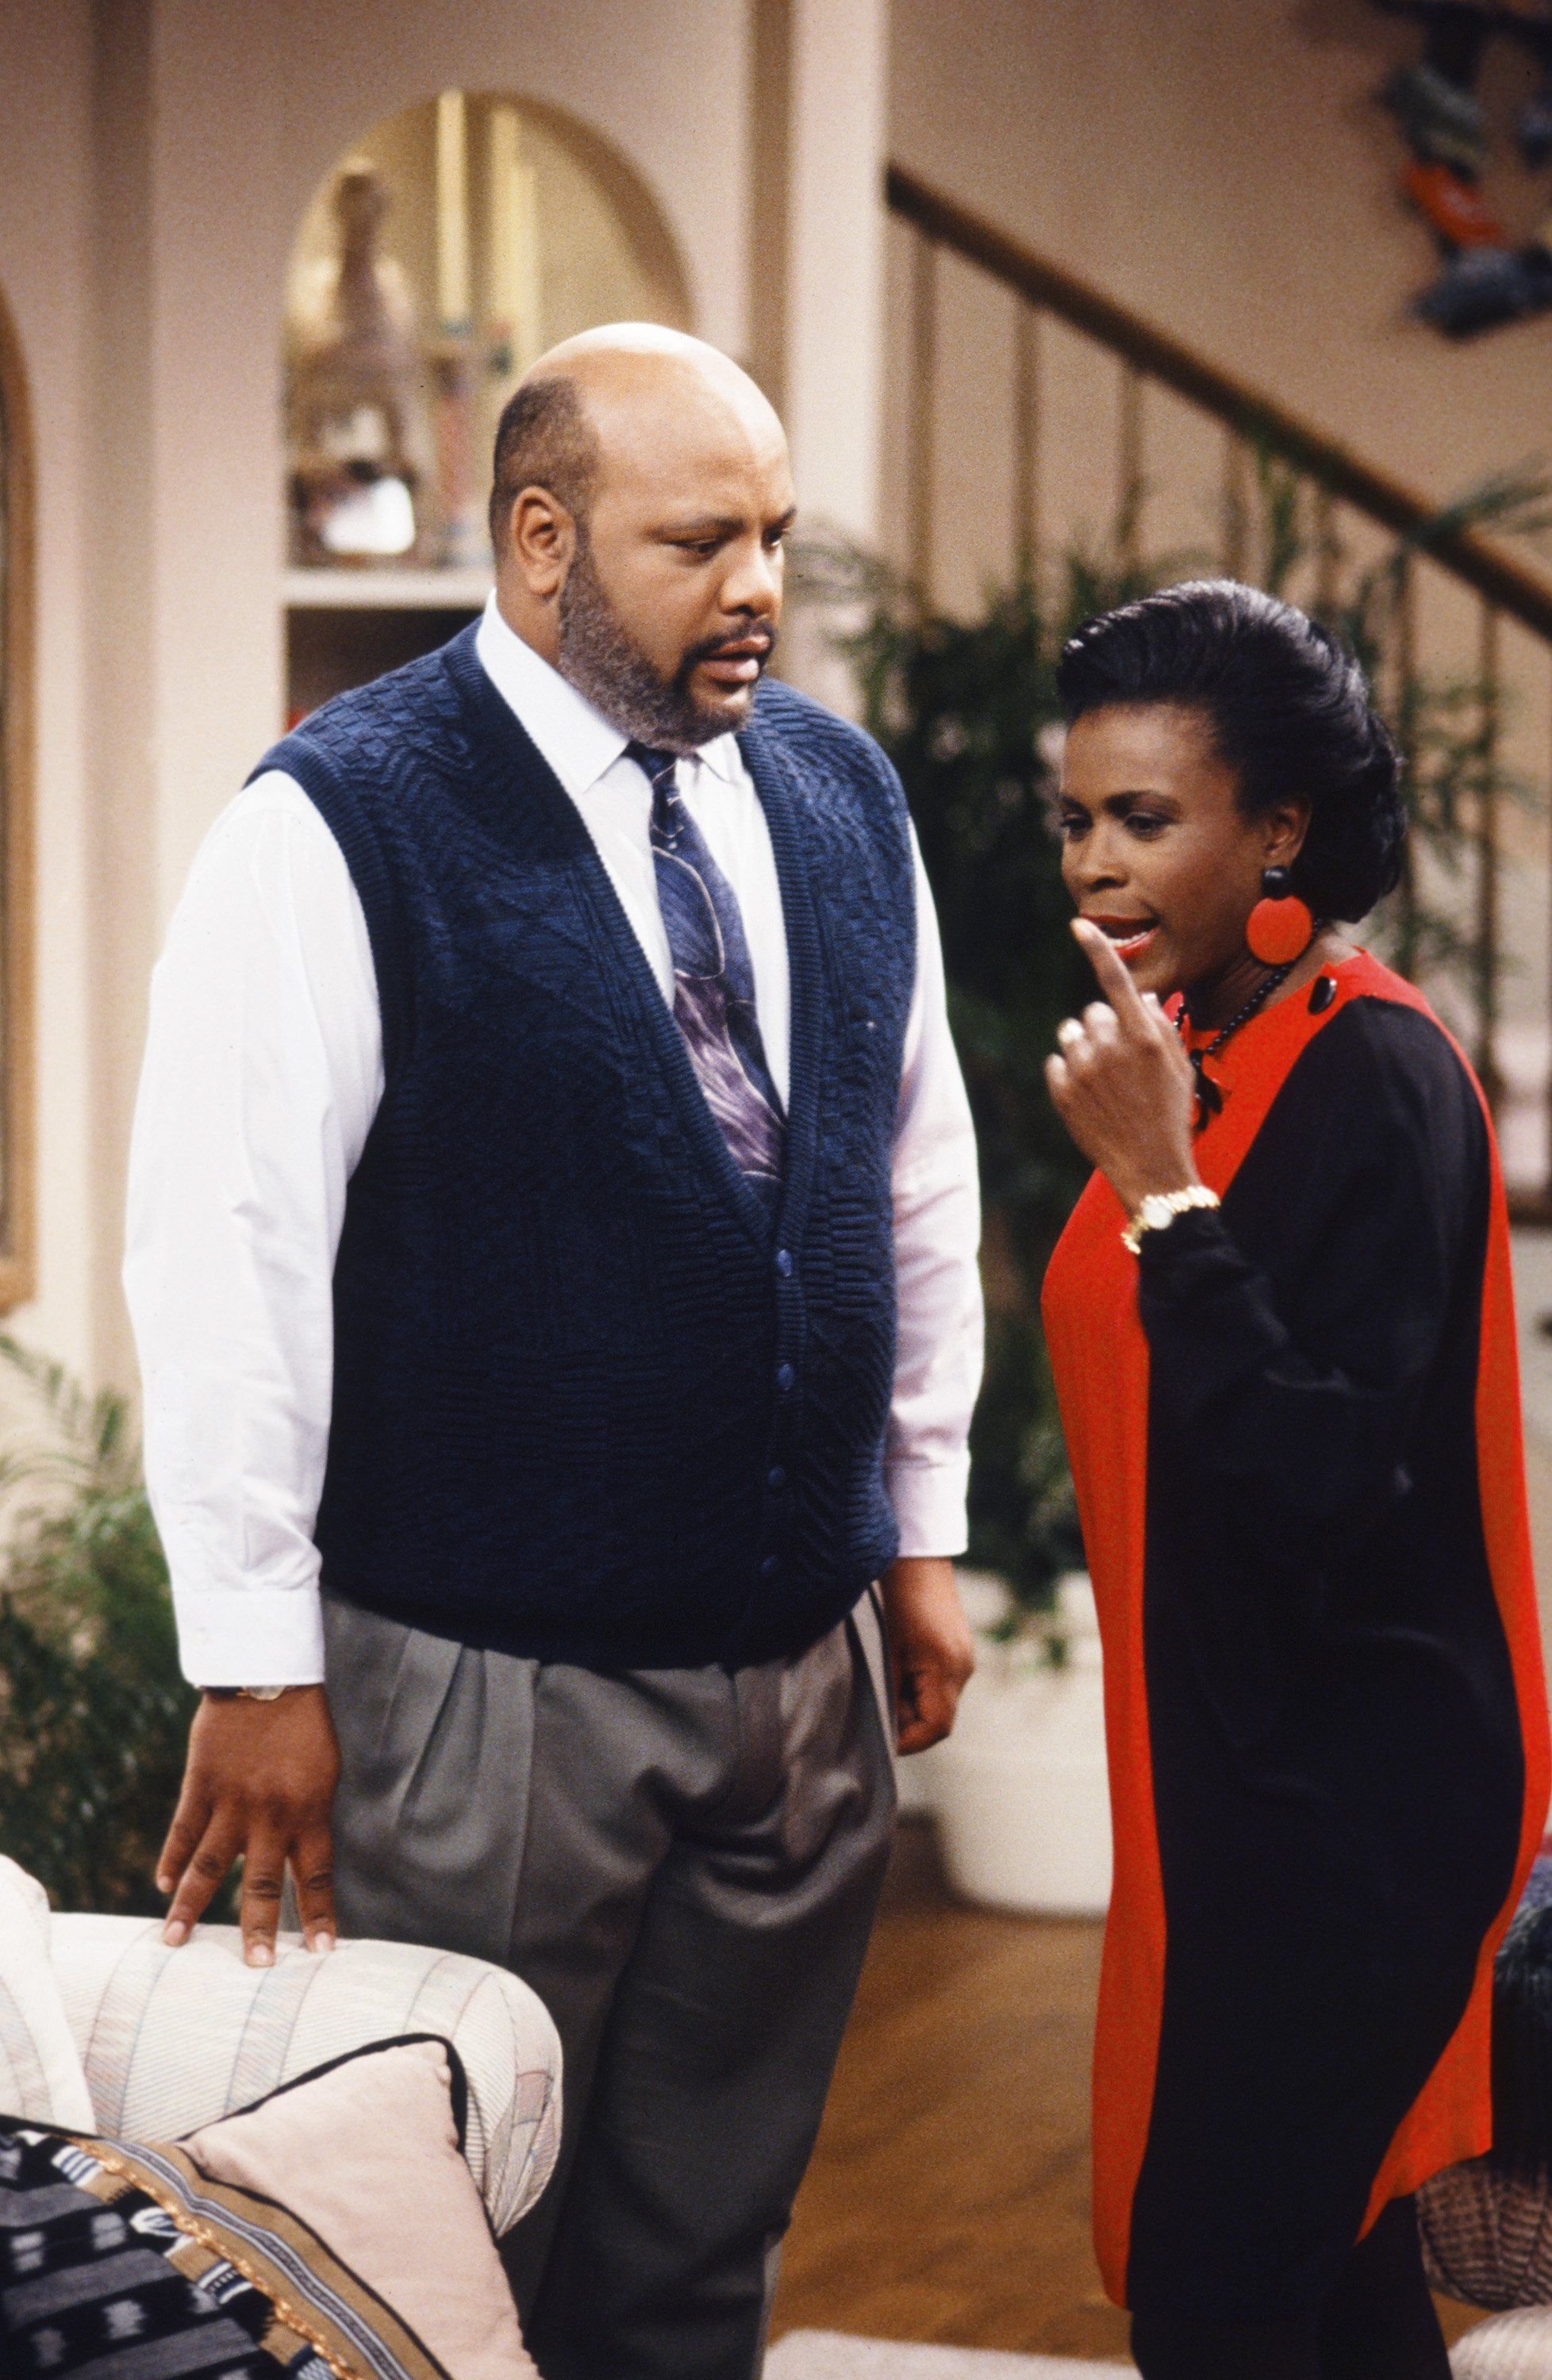 James Avery as Philip Banks, Janet Hubert as Vivian Bank during the "Six Degrees of Graduation" Episode 24 of "The Fresh Prince of Bel Air." | Source: Getty Images